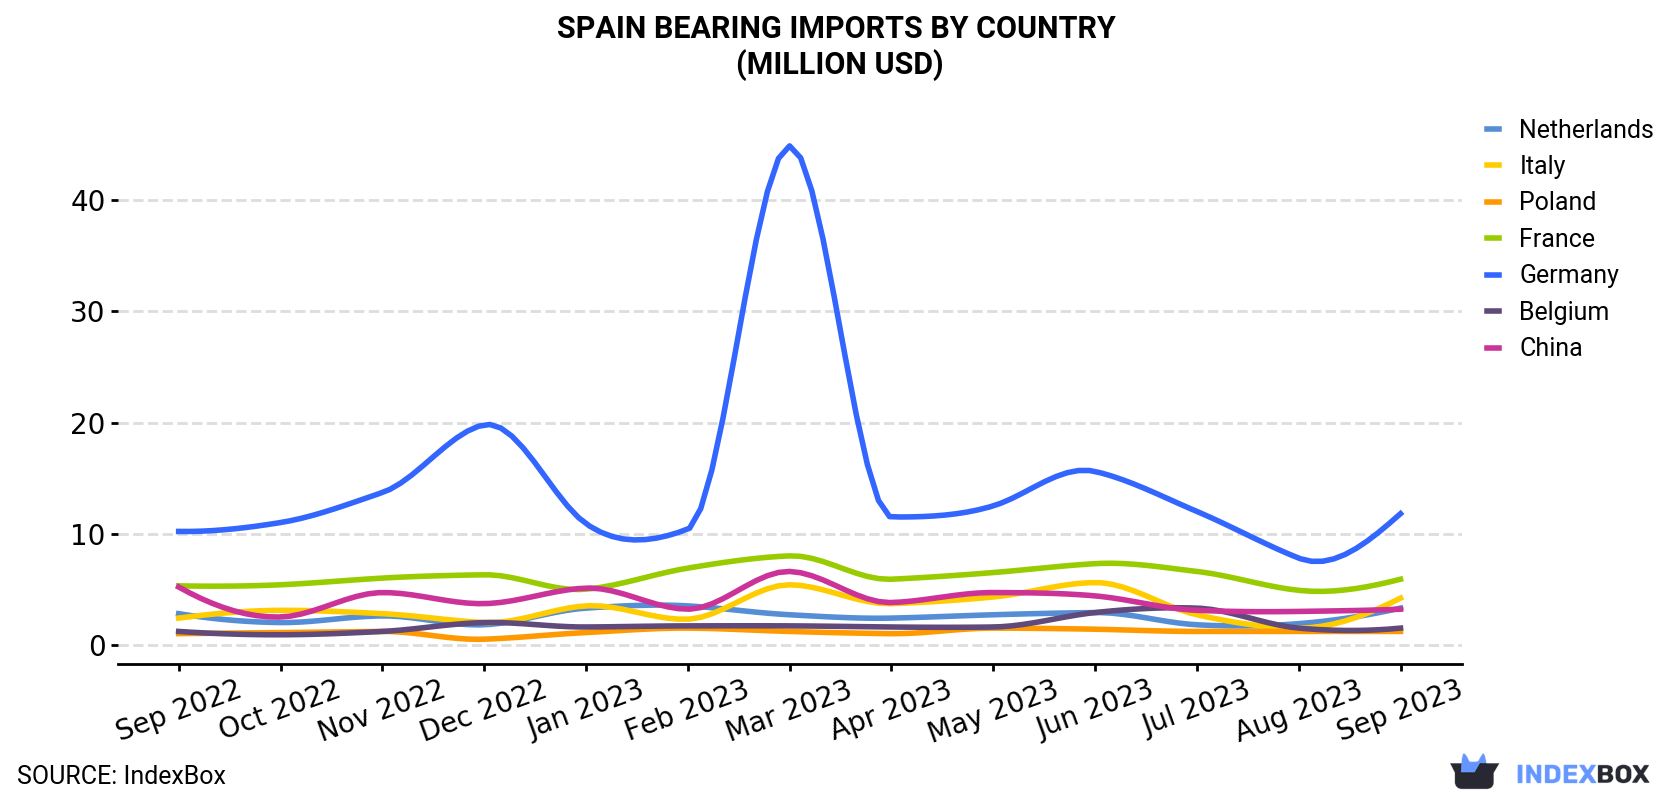 Spain Bearing Imports By Country (Million USD)